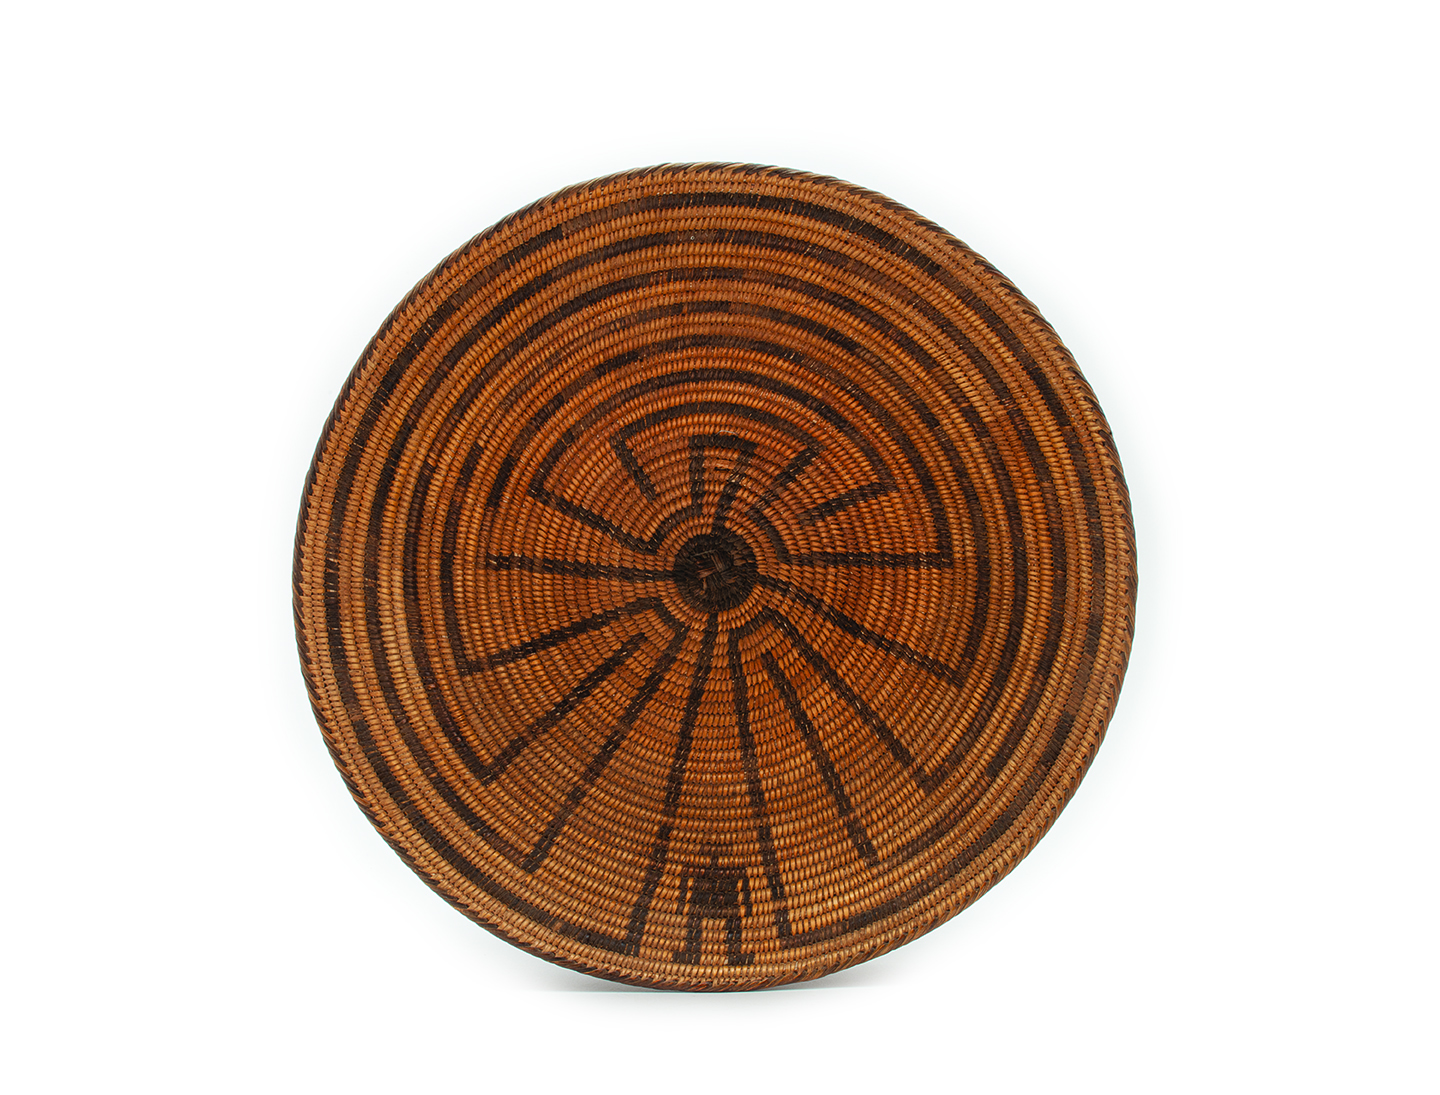 A round woven basket with a concentric pattern in shades of brown and black, displaying a symmetrical design in its center.